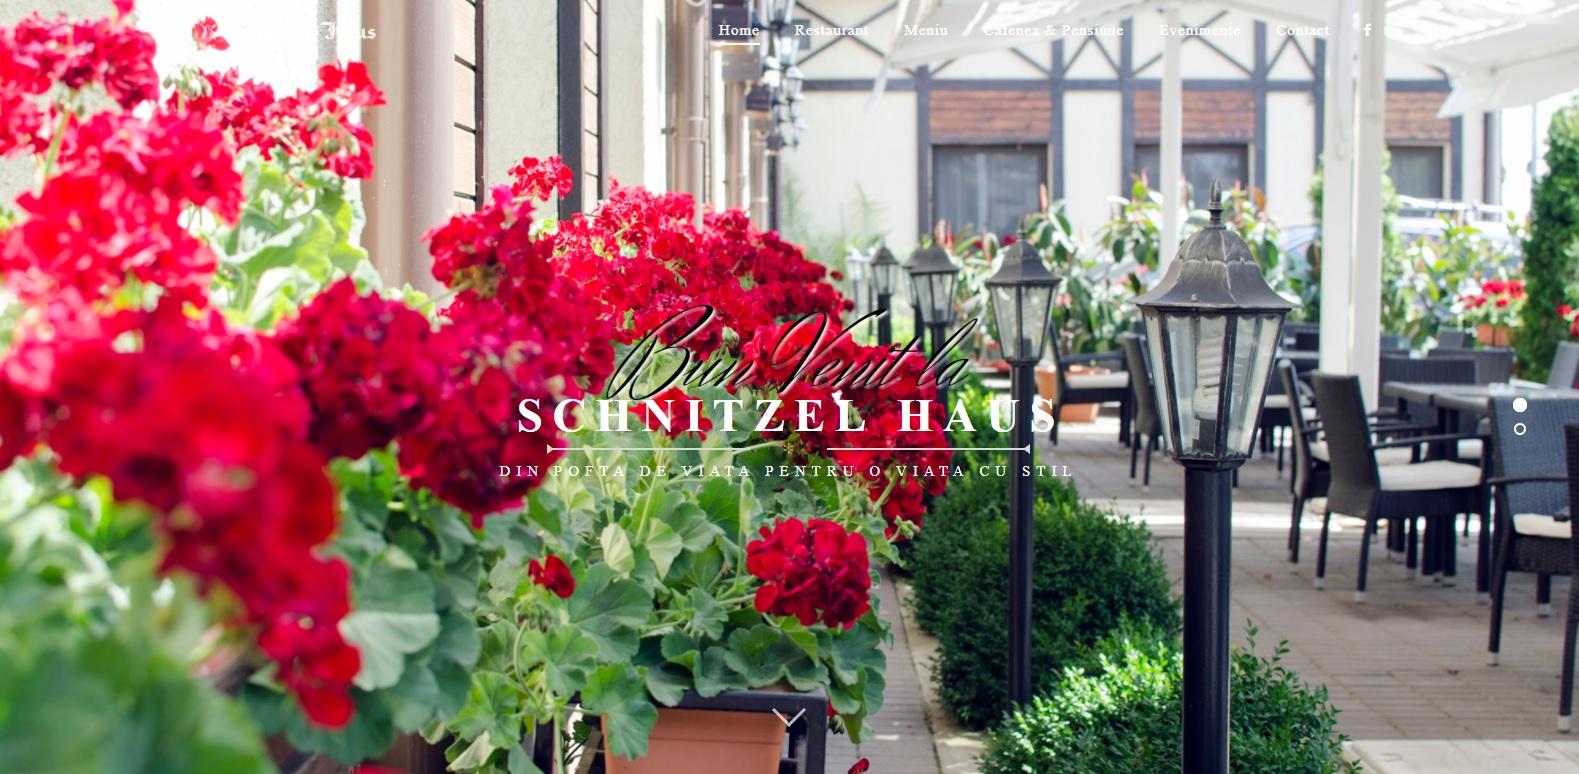 Cover image of this place Snitzel Haus